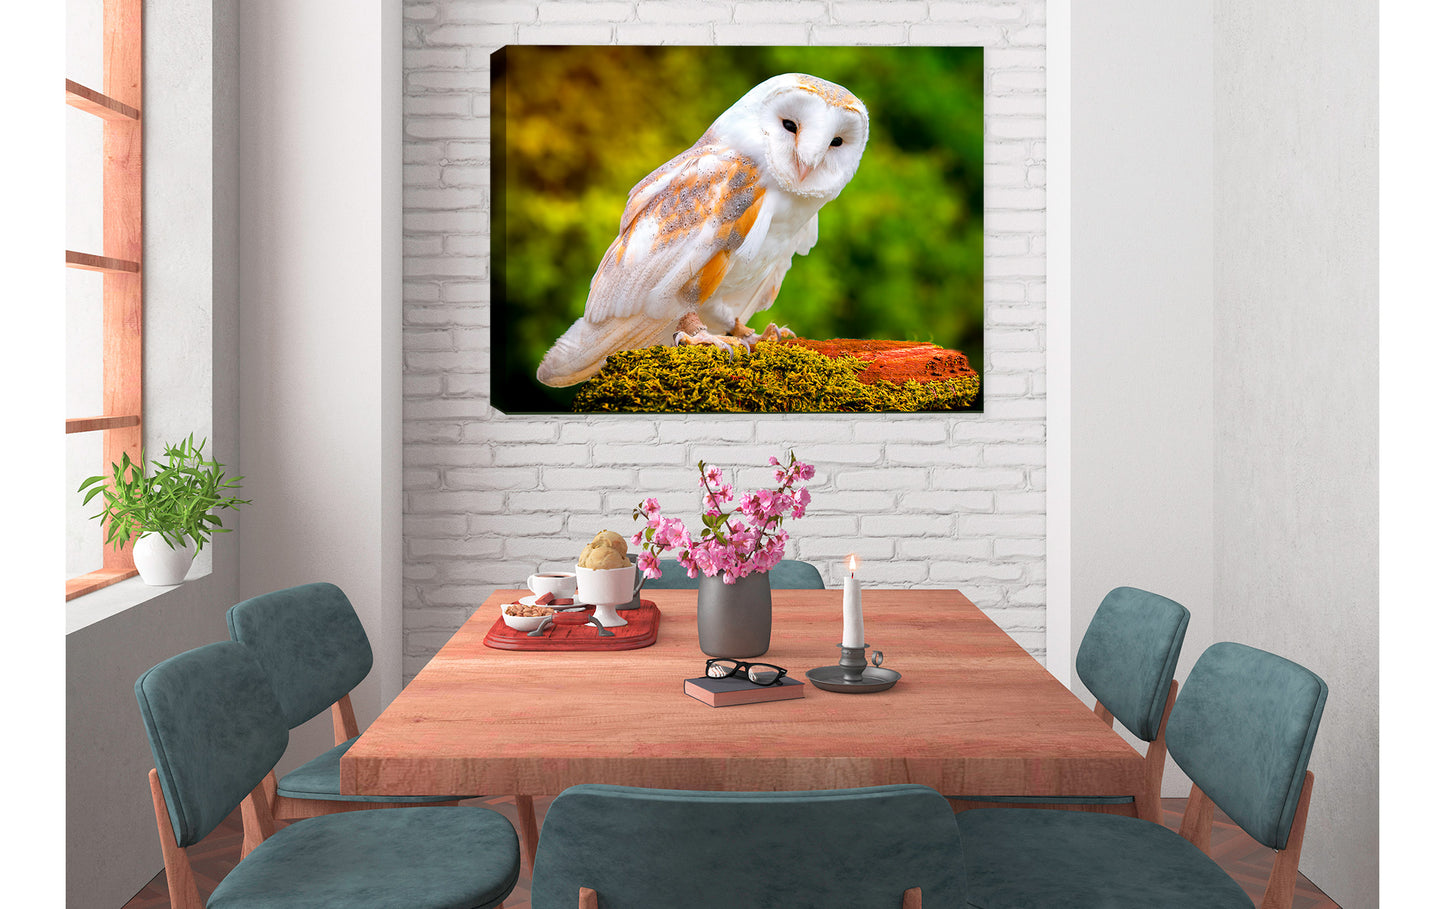 Owl Photo on Canvas in Dining Room